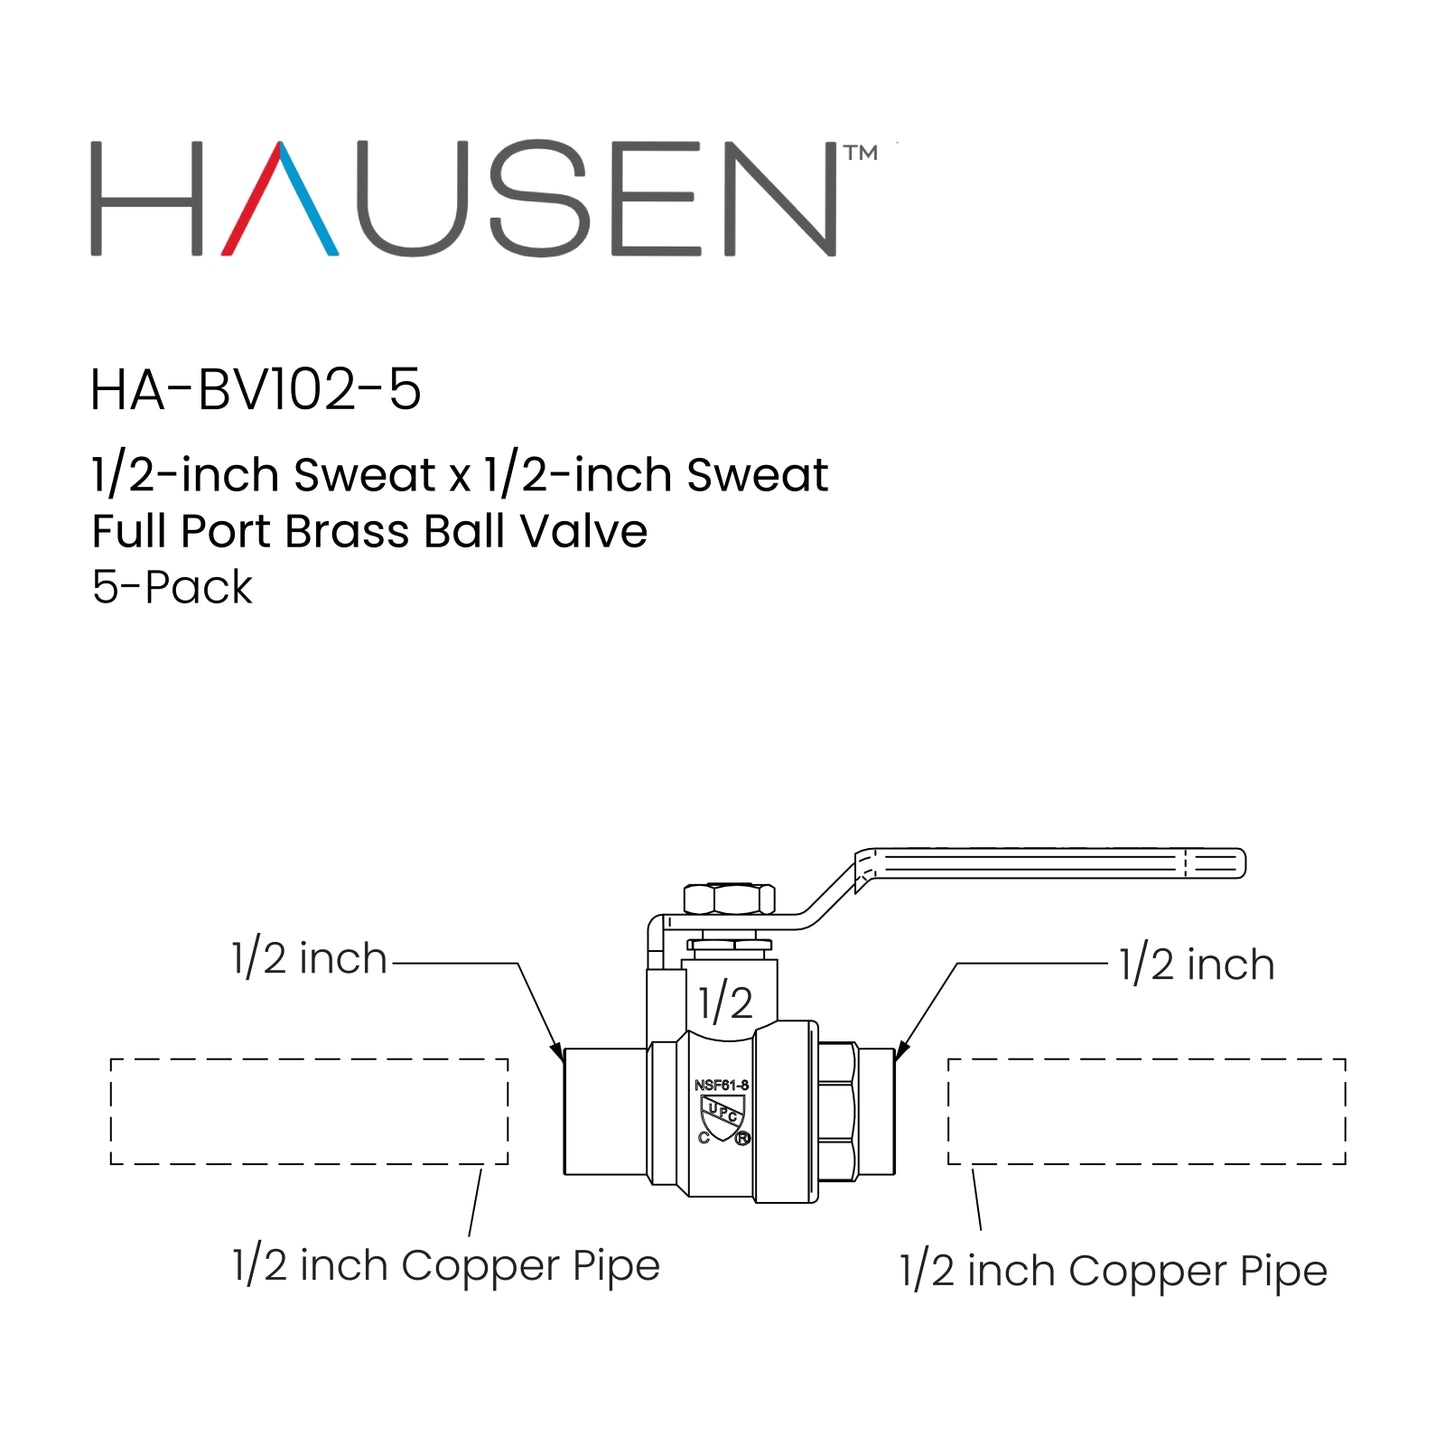 Hausen 1/2-inch Sweat x 1/2-inch Sweat Full Port Brass Ball Valve; Lead Free Forged Brass; Blowout Resistant Stem; cUPC/ANSI/NSF Certified; For Use in Potable Water Distribution Systems, 5-Pack